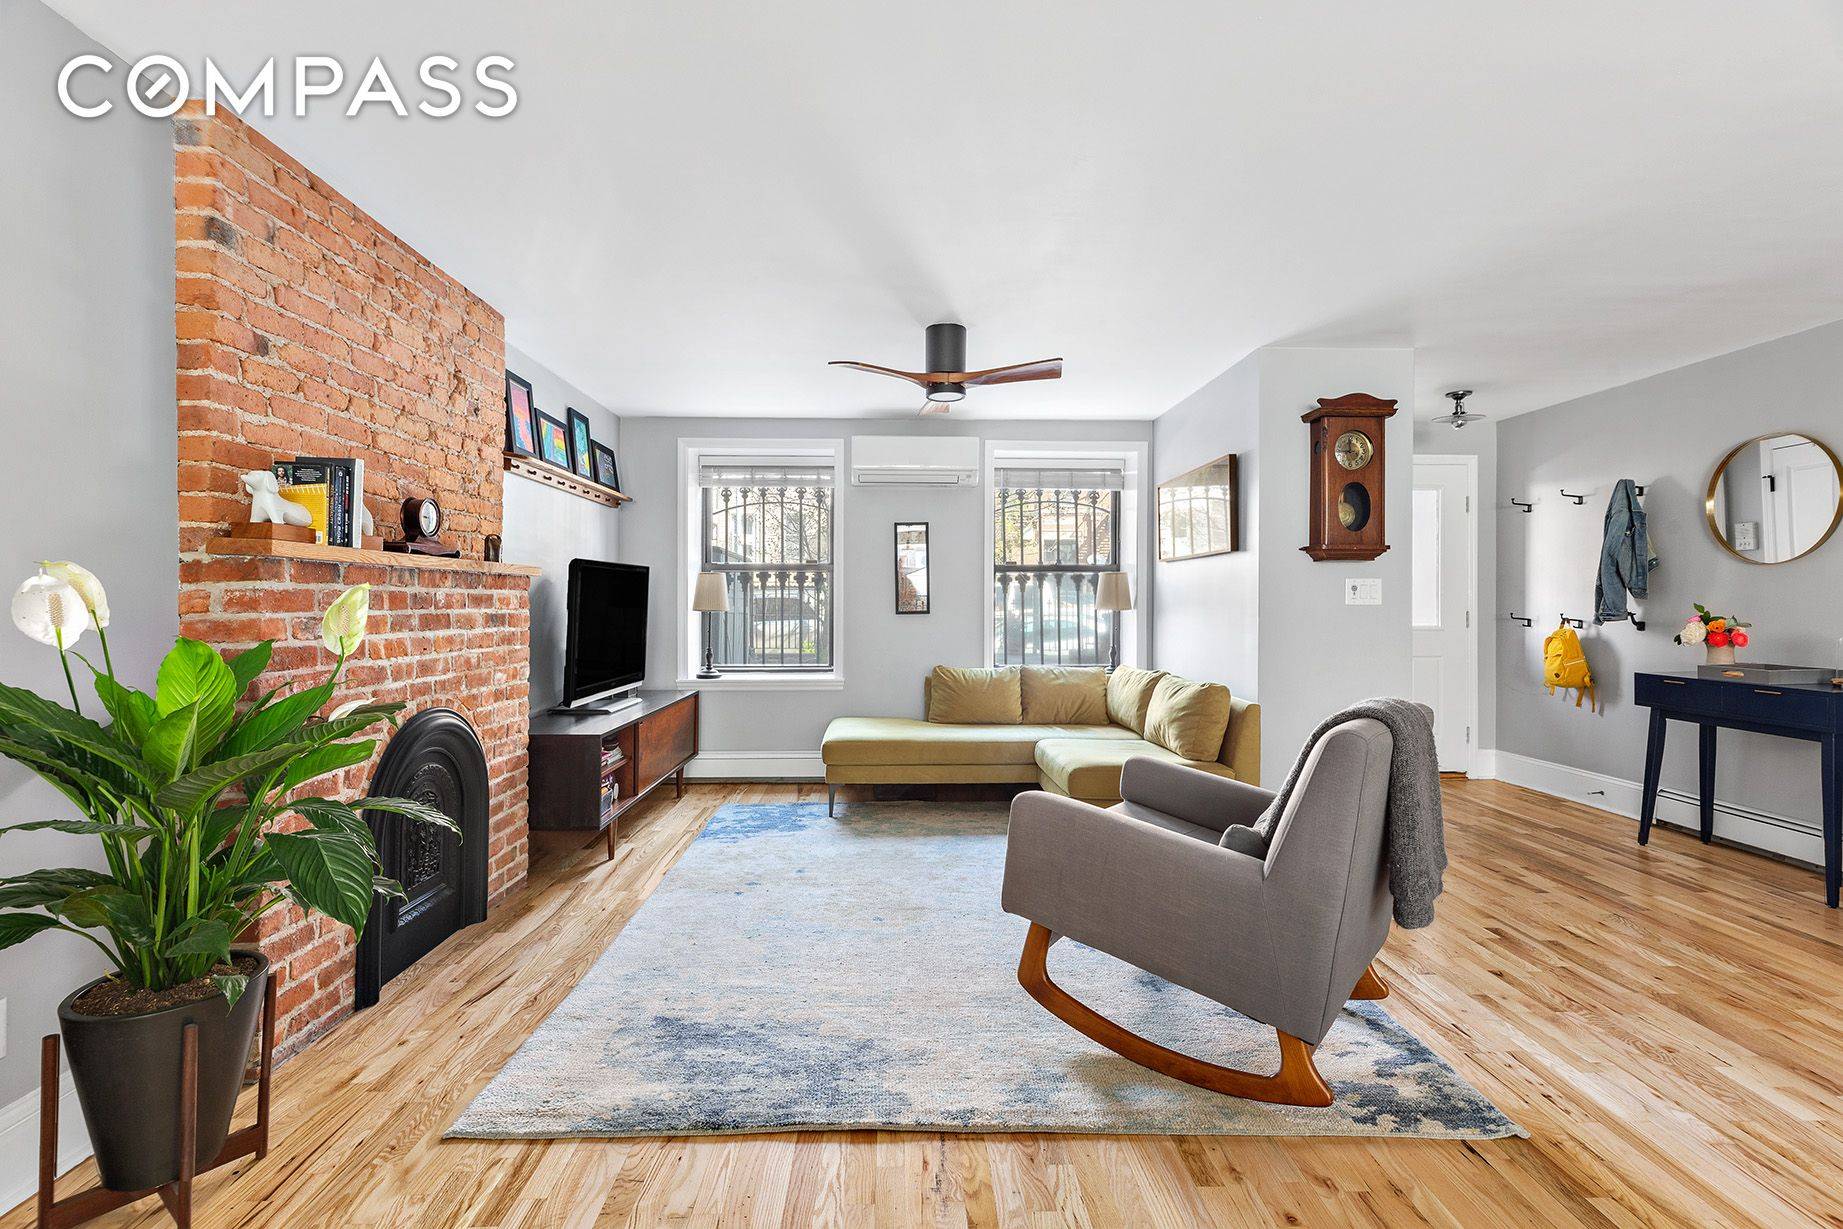 Move right in to this beautifully renovated two family home right off Nostrand Avenue in Bedford Stuyvesant.